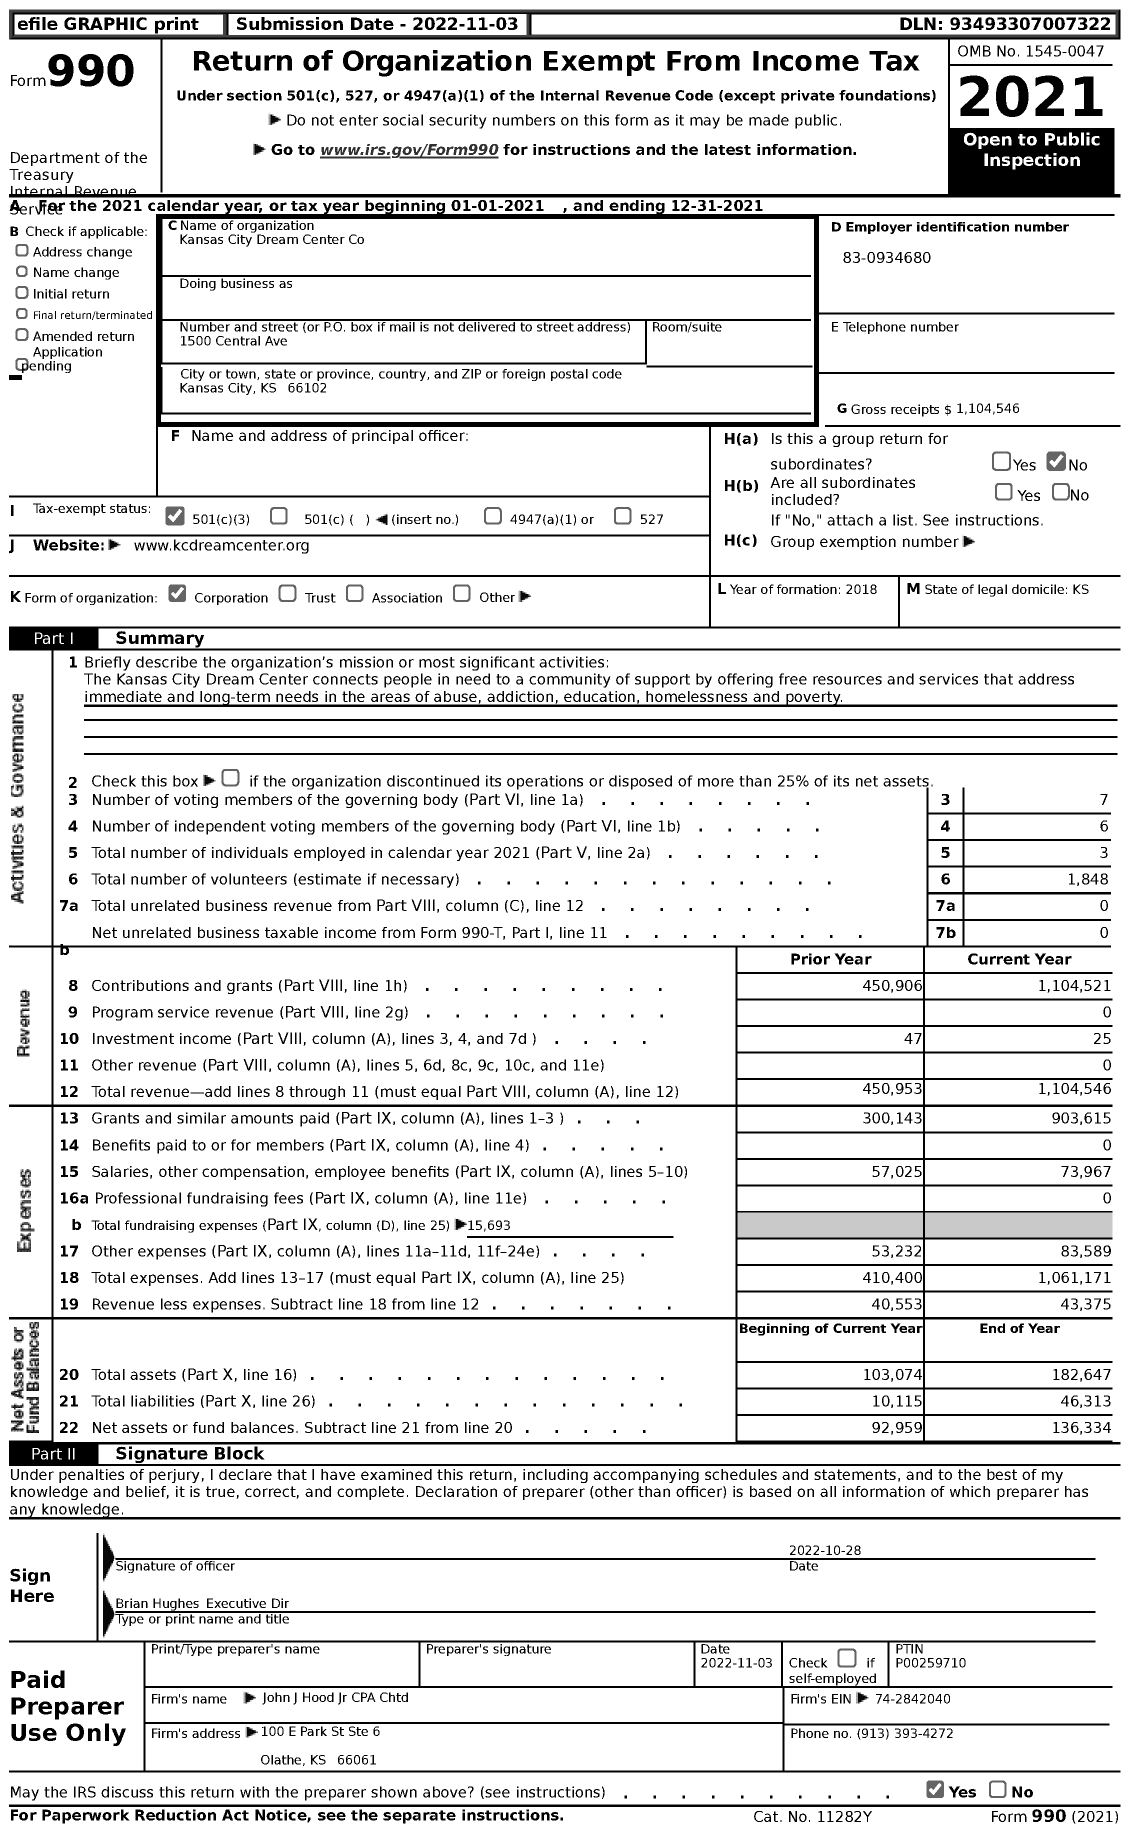 Image of first page of 2021 Form 990 for Kansas City Dream Center Co